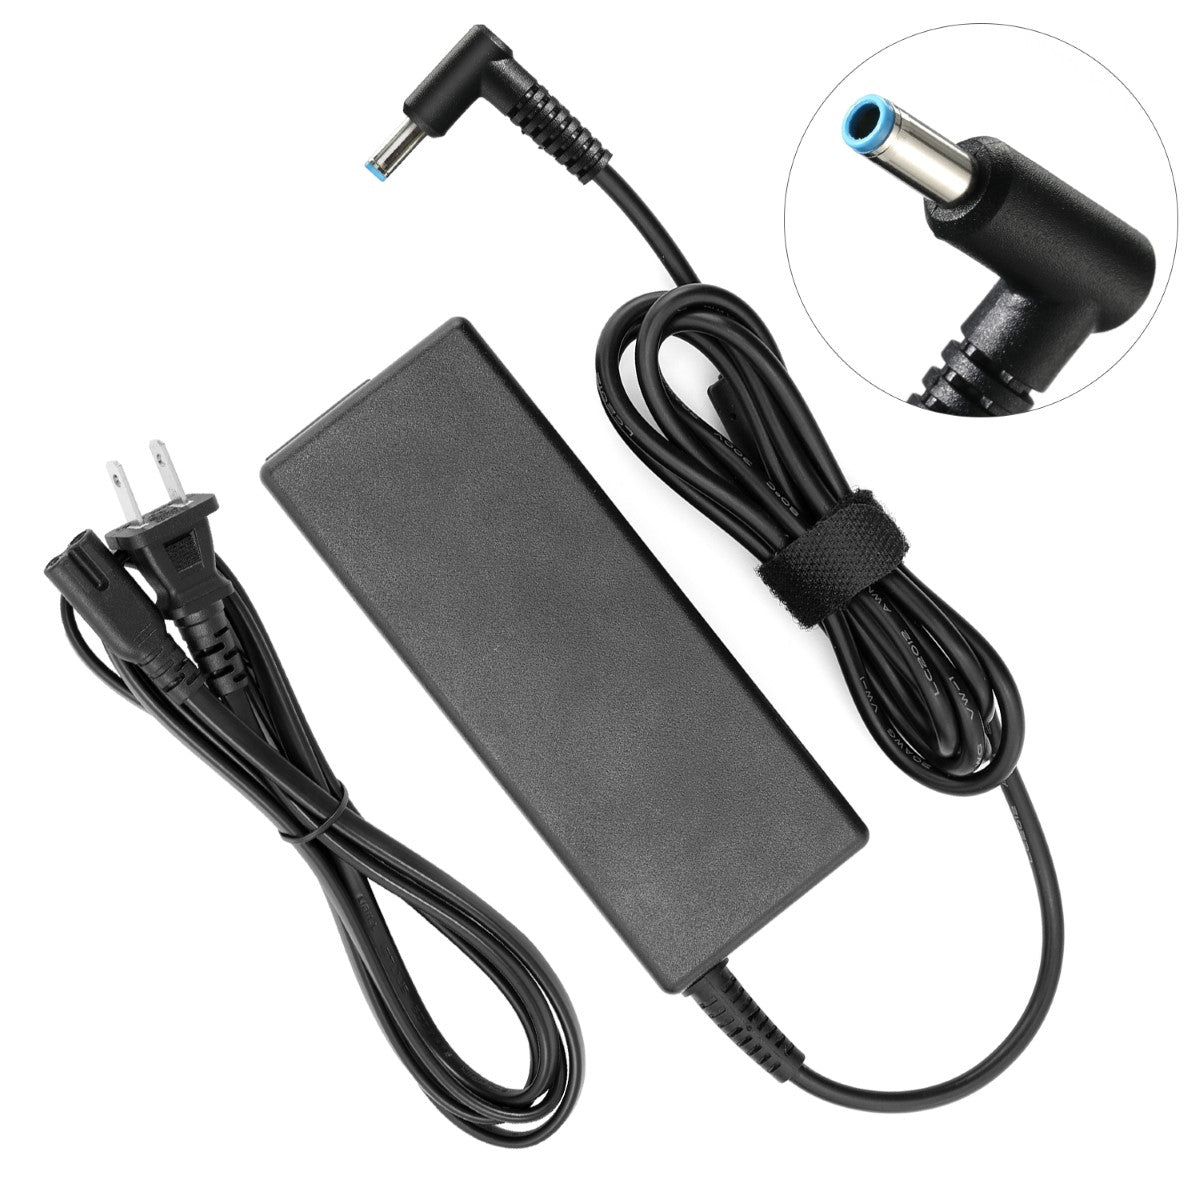 AC Adapter Charger for HP Envy Touchsmart 17-j078ca Notebook.